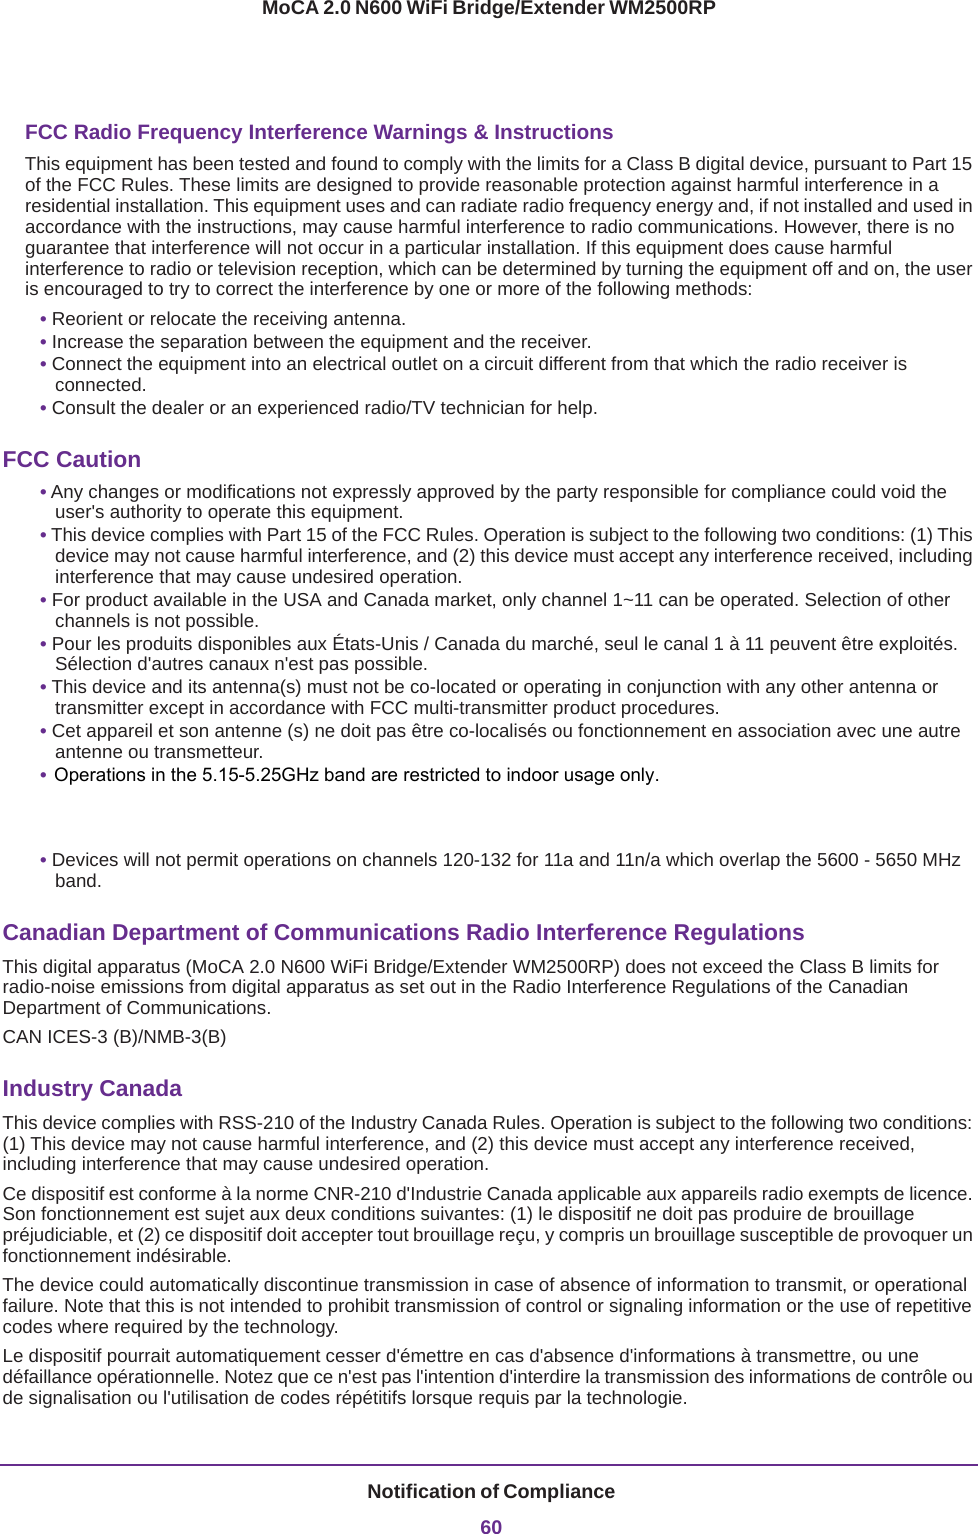 Notification of Compliance60MoCA 2.0 N600 WiFi Bridge/Extender WM2500RPFCC Radio Frequency Interference Warnings &amp; InstructionsThis equipment has been tested and found to comply with the limits for a Class B digital device, pursuant to Part 15 of the FCC Rules. These limits are designed to provide reasonable protection against harmful interference in a residential installation. This equipment uses and can radiate radio frequency energy and, if not installed and used in accordance with the instructions, may cause harmful interference to radio communications. However, there is no guarantee that interference will not occur in a particular installation. If this equipment does cause harmful interference to radio or television reception, which can be determined by turning the equipment off and on, the user is encouraged to try to correct the interference by one or more of the following methods:• Reorient or relocate the receiving antenna.• Increase the separation between the equipment and the receiver.• Connect the equipment into an electrical outlet on a circuit different from that which the radio receiver is connected.• Consult the dealer or an experienced radio/TV technician for help.FCC Caution• Any changes or modifications not expressly approved by the party responsible for compliance could void the user&apos;s authority to operate this equipment. • This device complies with Part 15 of the FCC Rules. Operation is subject to the following two conditions: (1) This device may not cause harmful interference, and (2) this device must accept any interference received, including interference that may cause undesired operation. • For product available in the USA and Canada market, only channel 1~11 can be operated. Selection of other channels is not possible.• Pour les produits disponibles aux États-Unis / Canada du marché, seul le canal 1 à 11 peuvent être exploités. Sélection d&apos;autres canaux n&apos;est pas possible.• This device and its antenna(s) must not be co-located or operating in conjunction with any other antenna or transmitter except in accordance with FCC multi-transmitter product procedures.• Cet appareil et son antenne (s) ne doit pas être co-localisés ou fonctionnement en association avec une autre antenne ou transmetteur.• For operation within a 5.15 ~ 5.25 GHz/5.47 ~ 5.725 GHz frequency range, it is restricted to an indoor environment. The band from 5600-5650 MHz will be disabled by the software during the manufacturing and cannot be changed by the end user. This device meets all the other requirements specified in Part 15E, Section 15.407 of the FCC Rules. • Devices will not permit operations on channels 120-132 for 11a and 11n/a which overlap the 5600 - 5650 MHz band. Canadian Department of Communications Radio Interference RegulationsThis digital apparatus (MoCA 2.0 N600 WiFi Bridge/Extender WM2500RP) does not exceed the Class B limits for radio-noise emissions from digital apparatus as set out in the Radio Interference Regulations of the Canadian Department of Communications.CAN ICES-3 (B)/NMB-3(B) Industry CanadaThis device complies with RSS-210 of the Industry Canada Rules. Operation is subject to the following two conditions: (1) This device may not cause harmful interference, and (2) this device must accept any interference received, including interference that may cause undesired operation.Ce dispositif est conforme à la norme CNR-210 d&apos;Industrie Canada applicable aux appareils radio exempts de licence. Son fonctionnement est sujet aux deux conditions suivantes: (1) le dispositif ne doit pas produire de brouillage préjudiciable, et (2) ce dispositif doit accepter tout brouillage reçu, y compris un brouillage susceptible de provoquer un fonctionnement indésirable.The device could automatically discontinue transmission in case of absence of information to transmit, or operational failure. Note that this is not intended to prohibit transmission of control or signaling information or the use of repetitive codes where required by the technology.Le dispositif pourrait automatiquement cesser d&apos;émettre en cas d&apos;absence d&apos;informations à transmettre, ou une défaillance opérationnelle. Notez que ce n&apos;est pas l&apos;intention d&apos;interdire la transmission des informations de contrôle ou de signalisation ou l&apos;utilisation de codes répétitifs lorsque requis par la technologie. Operations in the 5.15-5.25GHz band are restricted to indoor usage only. 